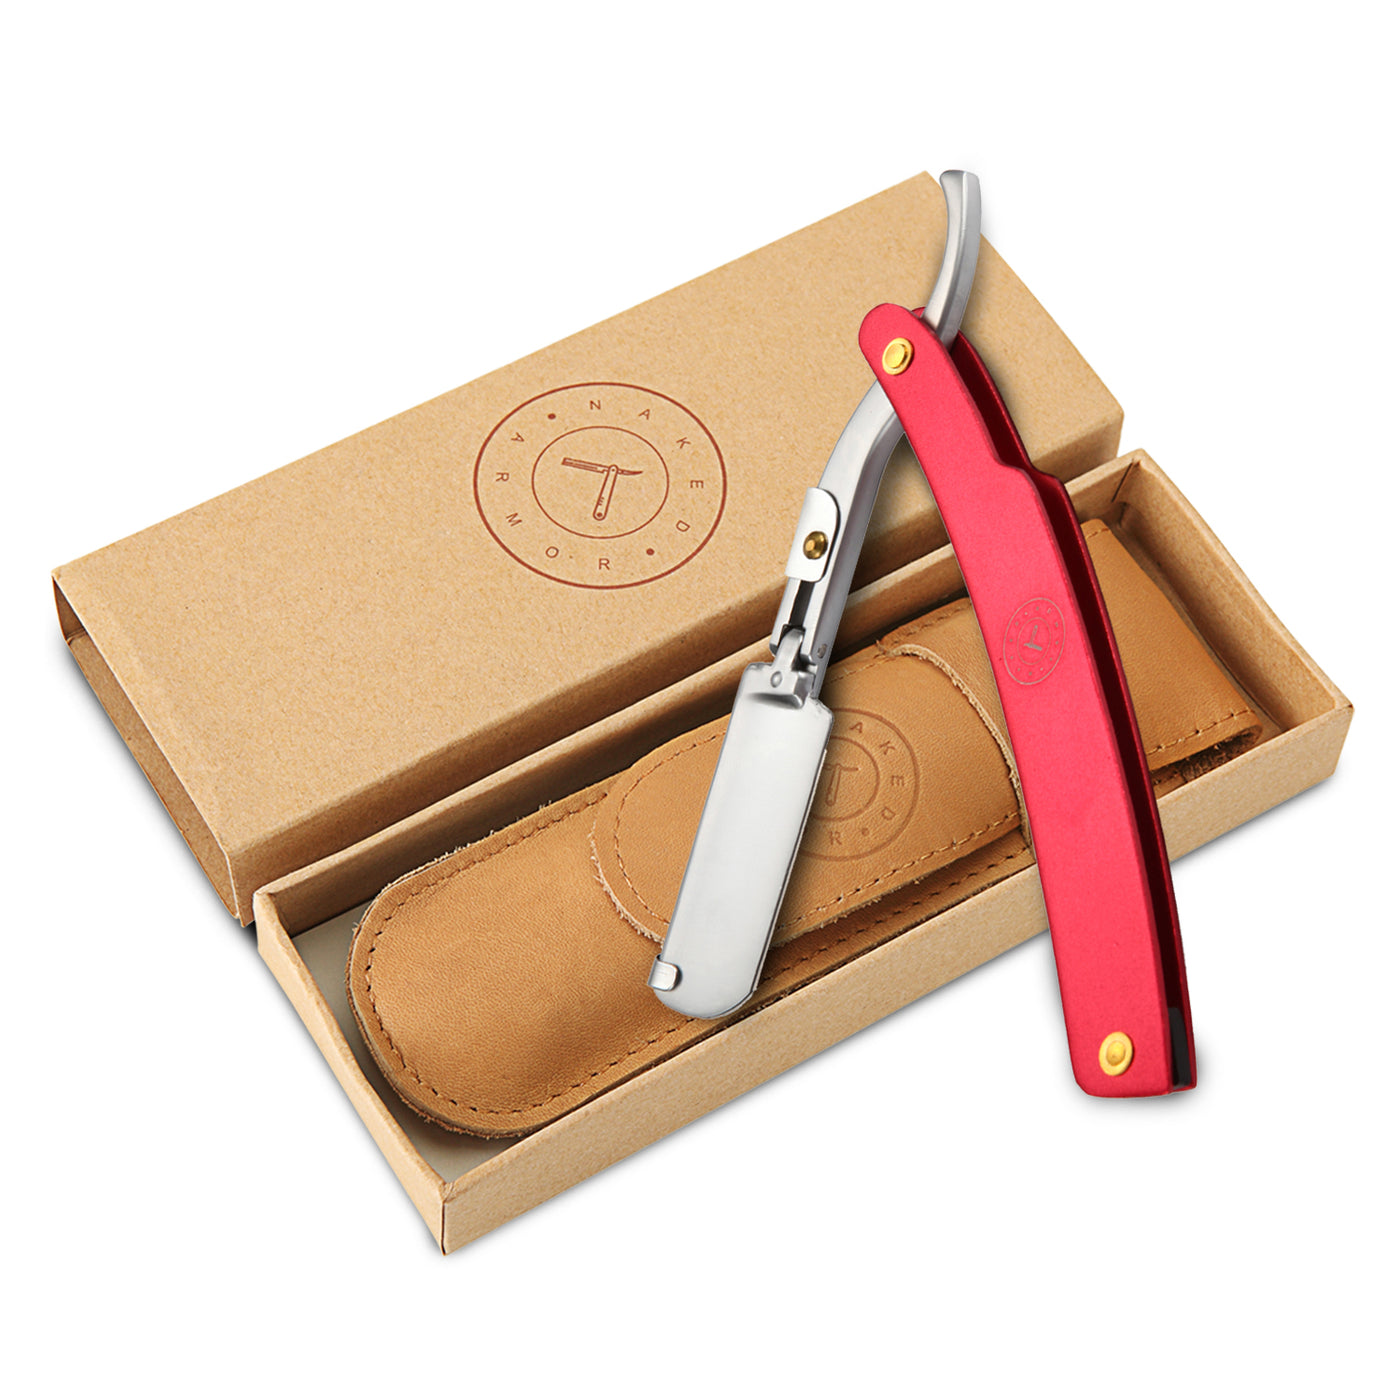  Lucan Shavette Straight Razor | Red by Naked Armor sold by Naked Armor Razors